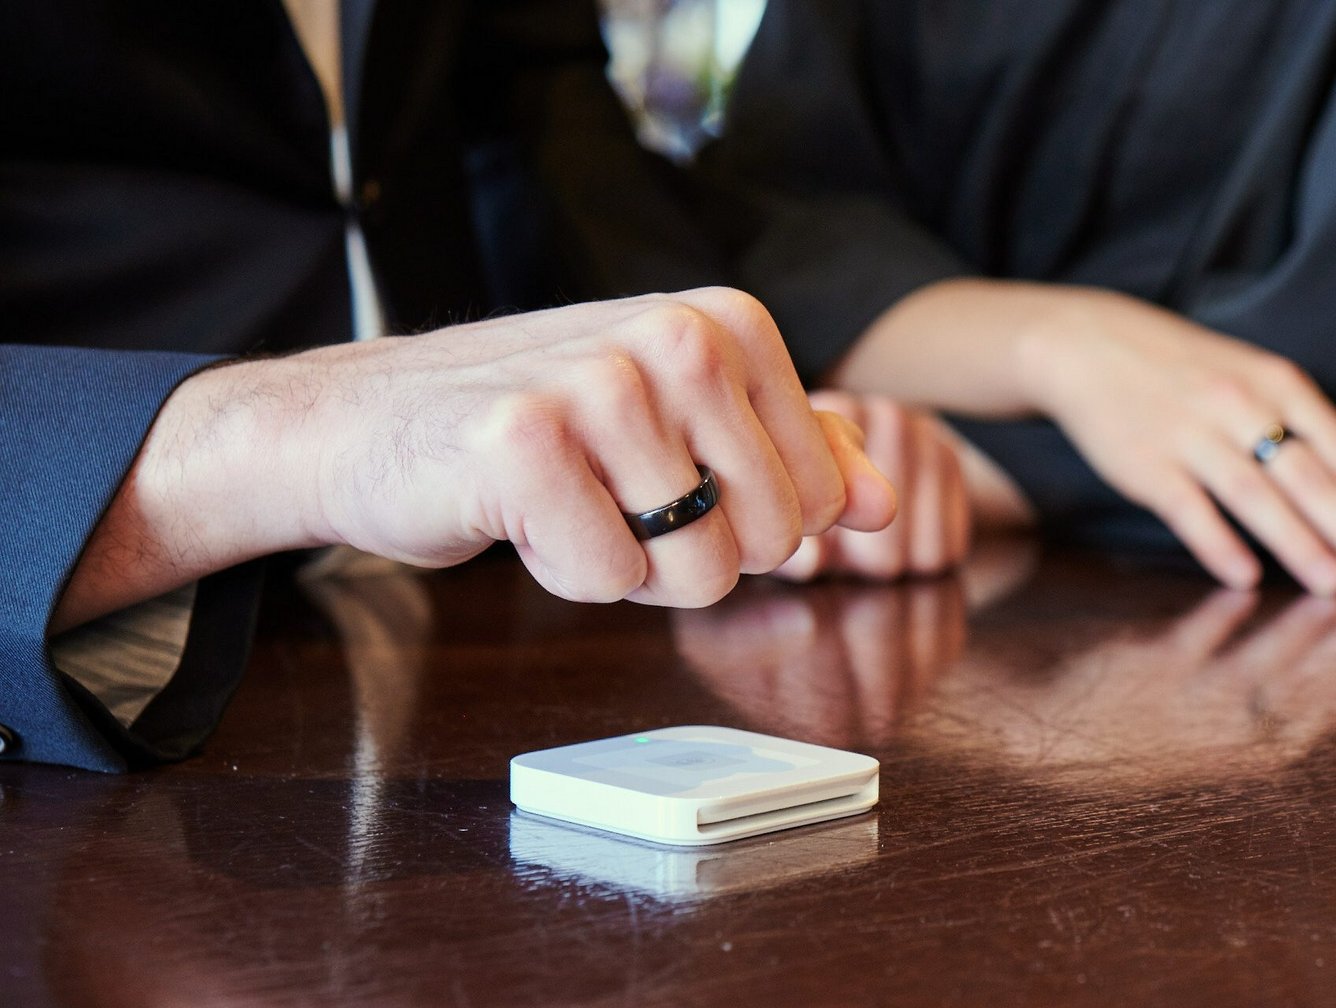 McLear smart ring lets you pay your way and never needs charging - Wareable